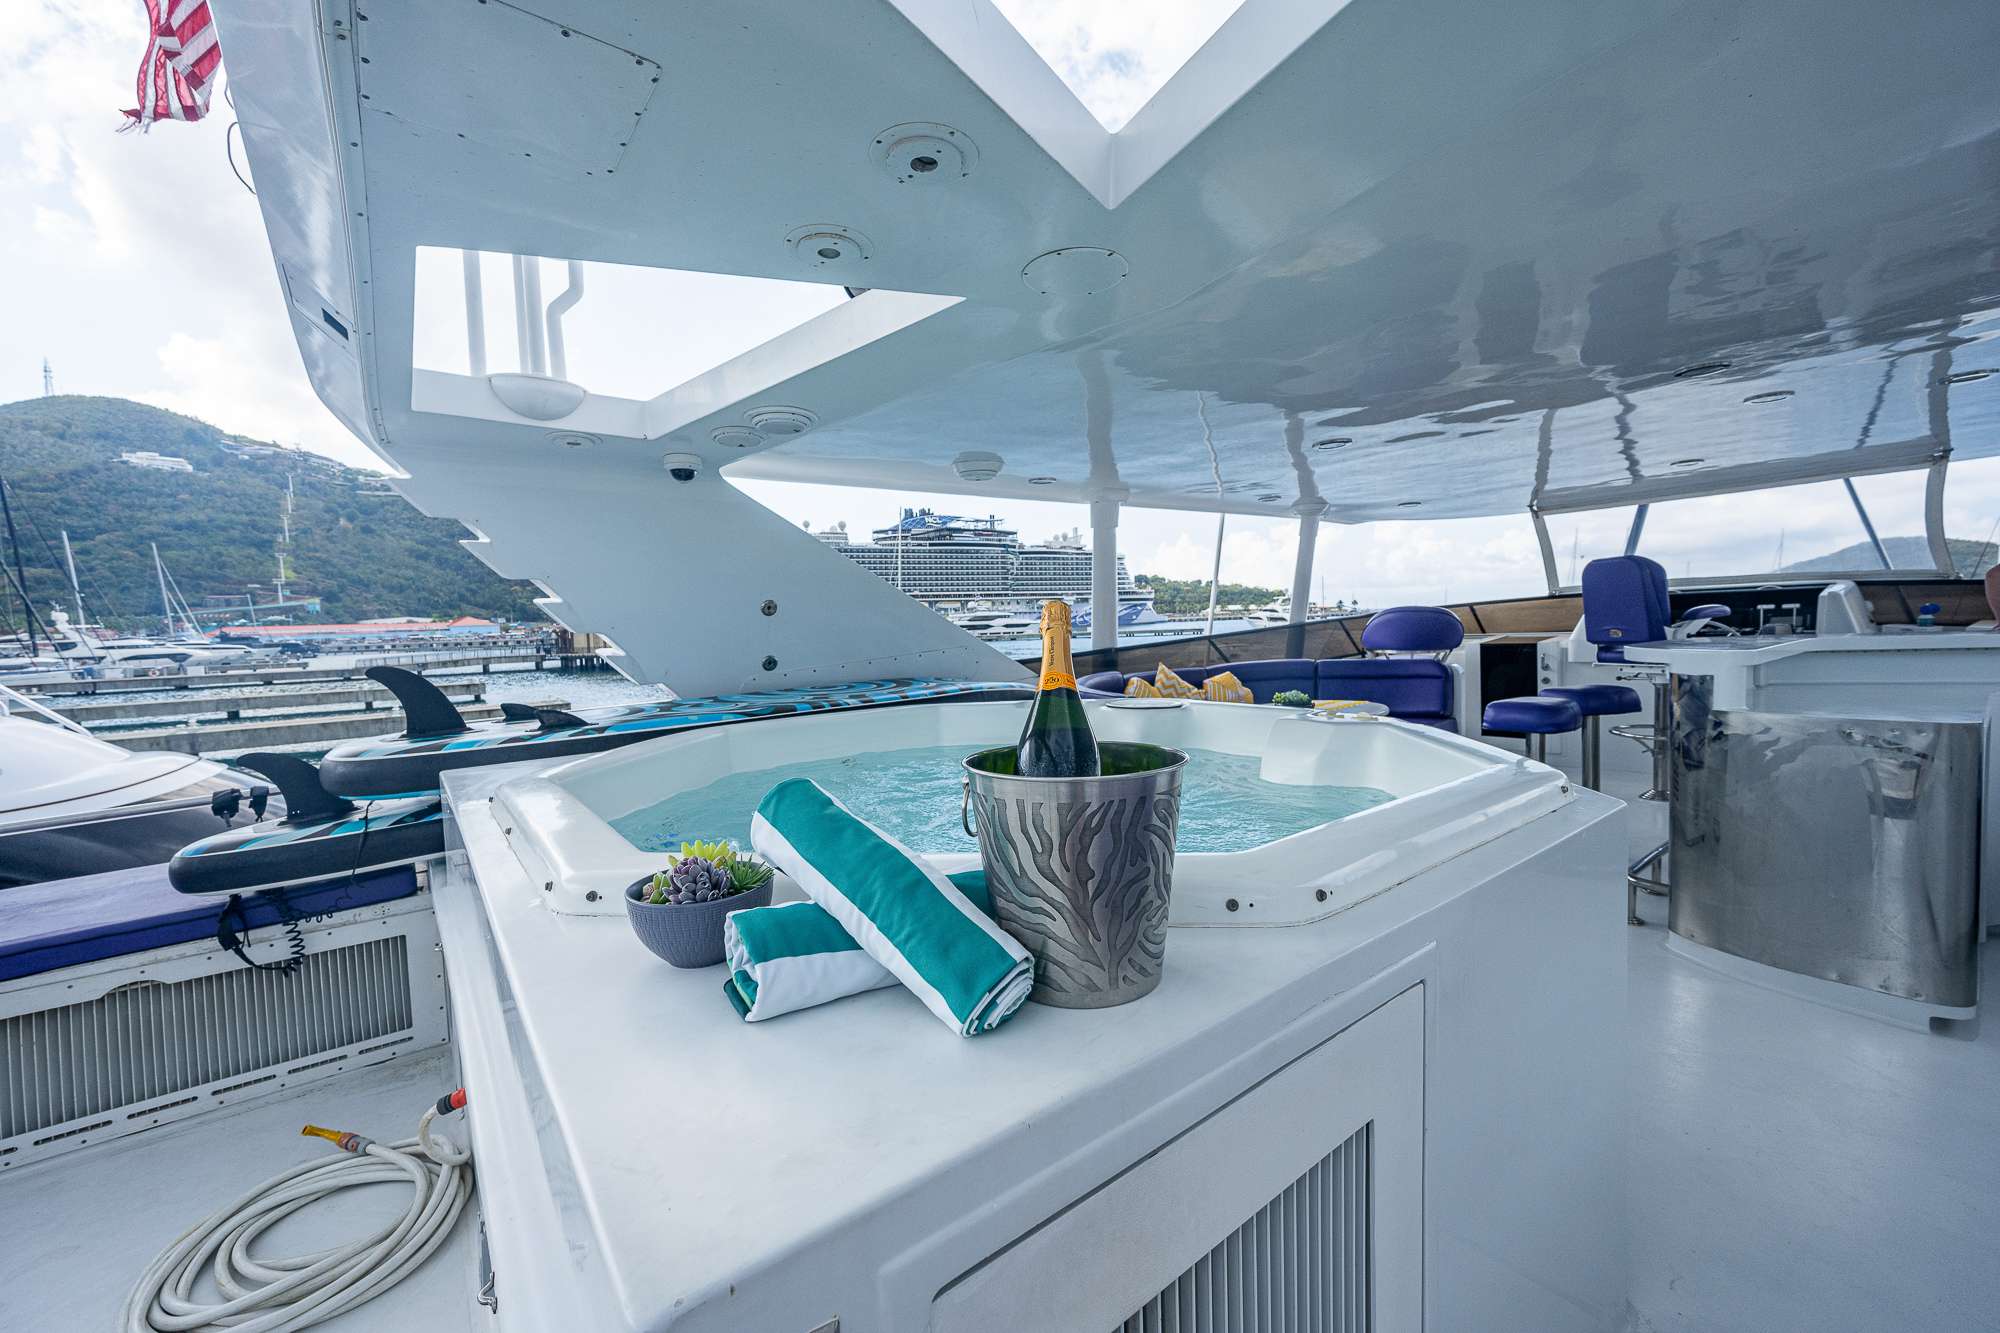 LADY SHARON GALE Yacht Charter - Breezy aft deck dining.